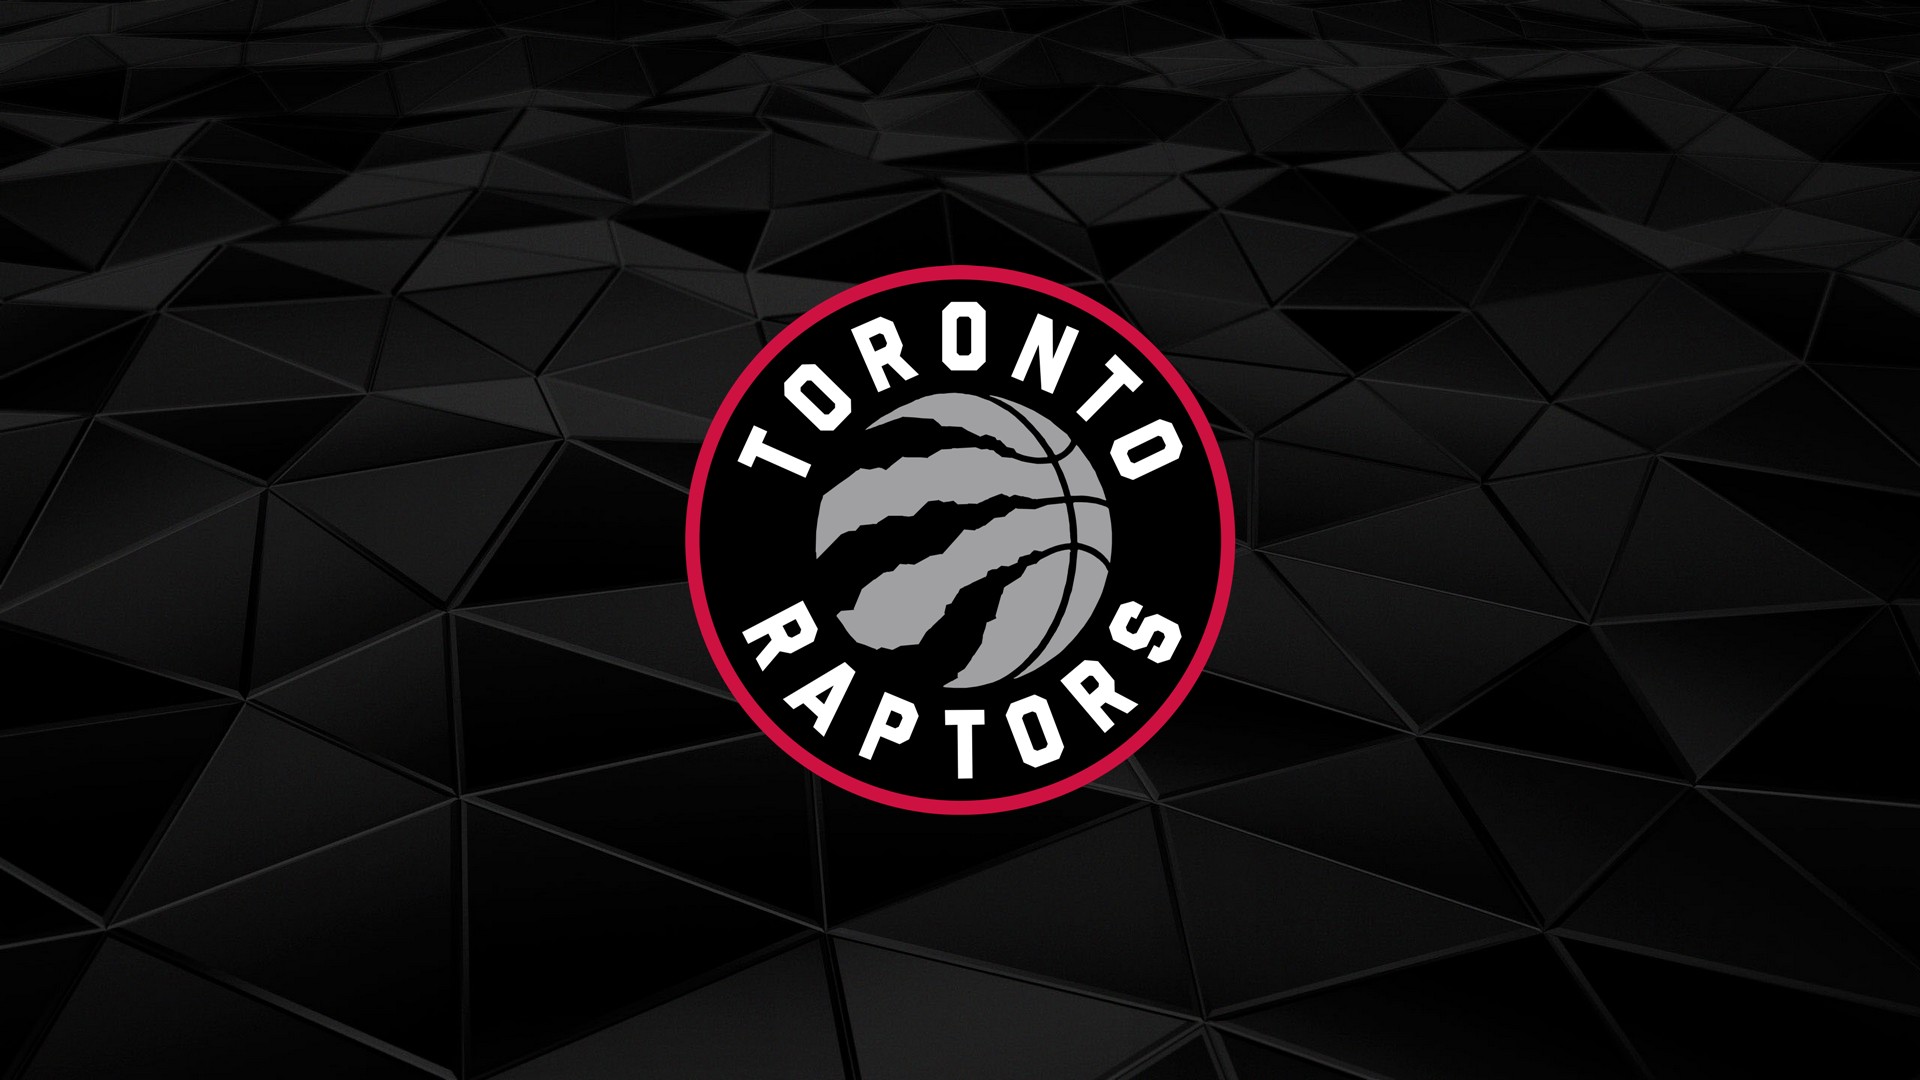 Toronto Raptors Logo Wallpaper For Mac Backgrounds with high-resolution 1920x1080 pixel. You can use this wallpaper for your Desktop Computer Backgrounds, Windows or Mac Screensavers, iPhone Lock screen, Tablet or Android and another Mobile Phone device